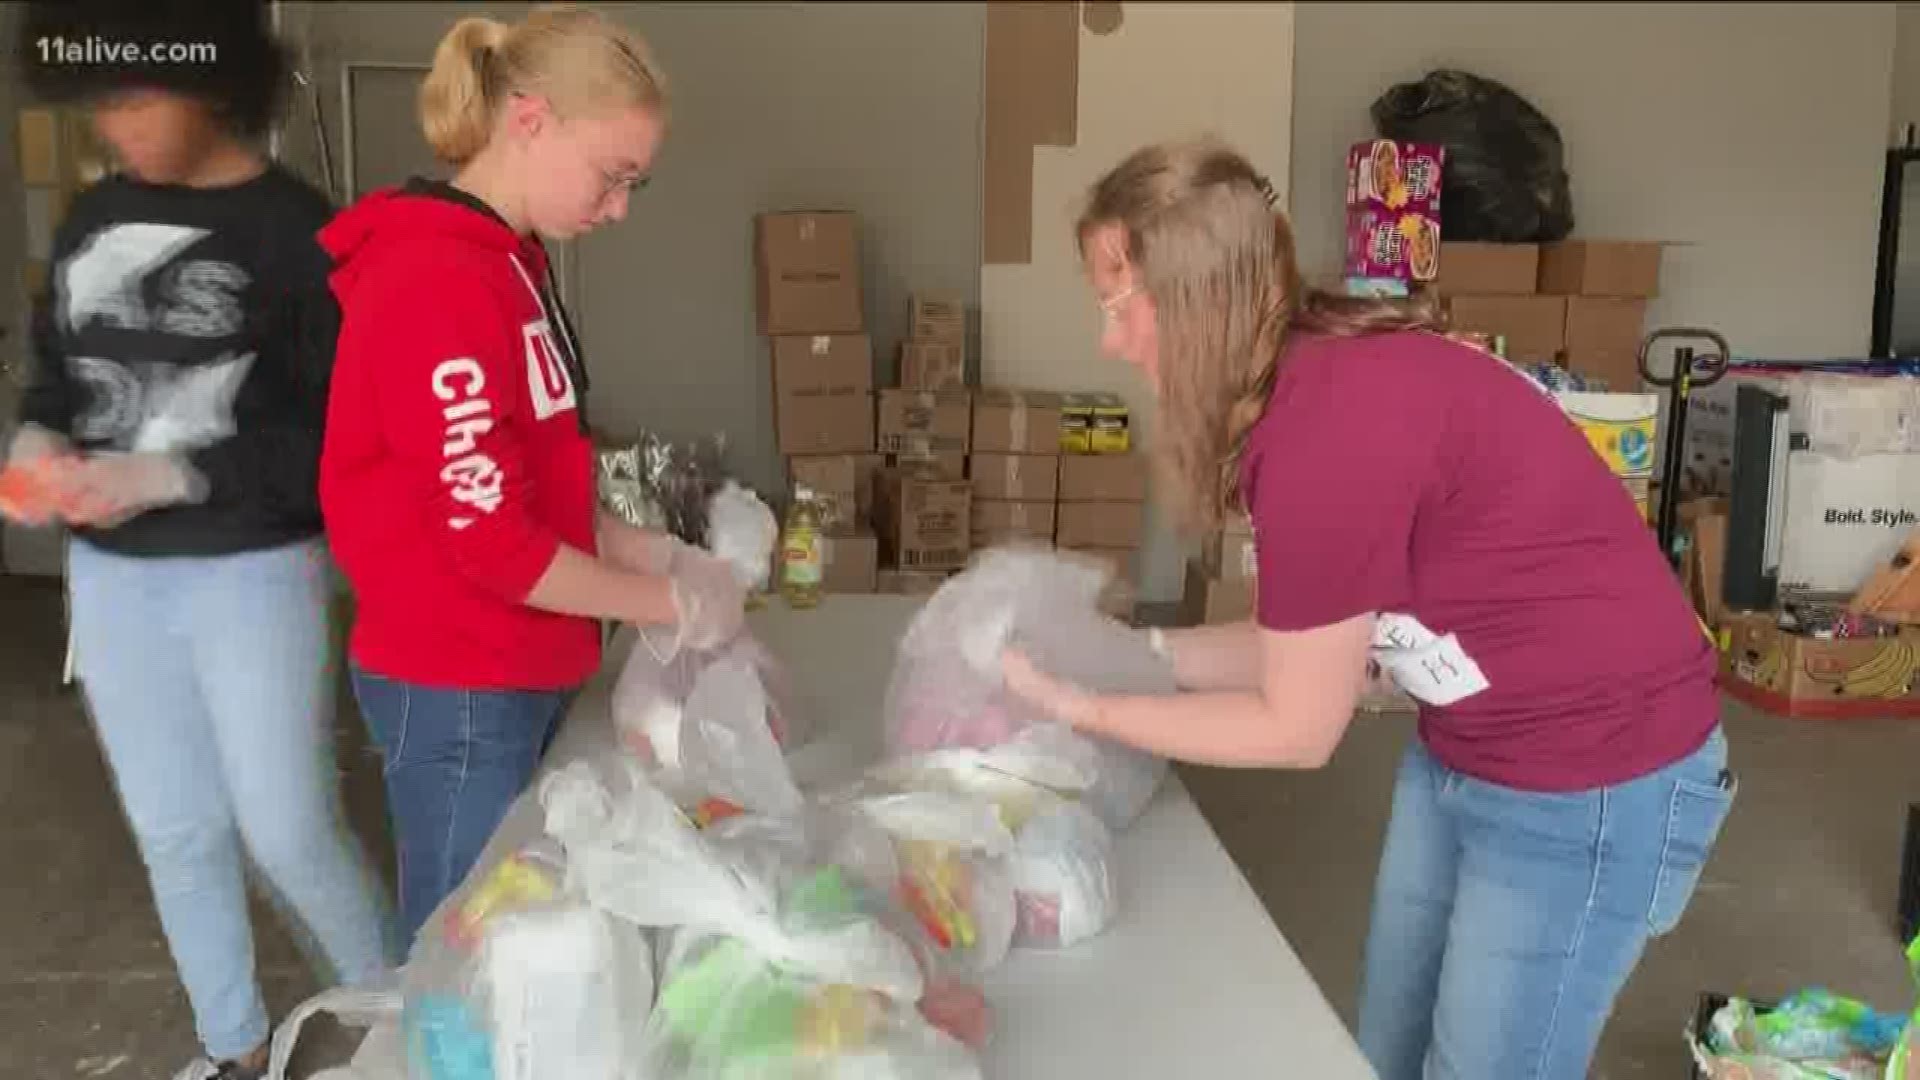 Their clients aren't allowed in their facility due to the COVID-19 pandemic, so they're putting together bags with food, information and something a little extra.